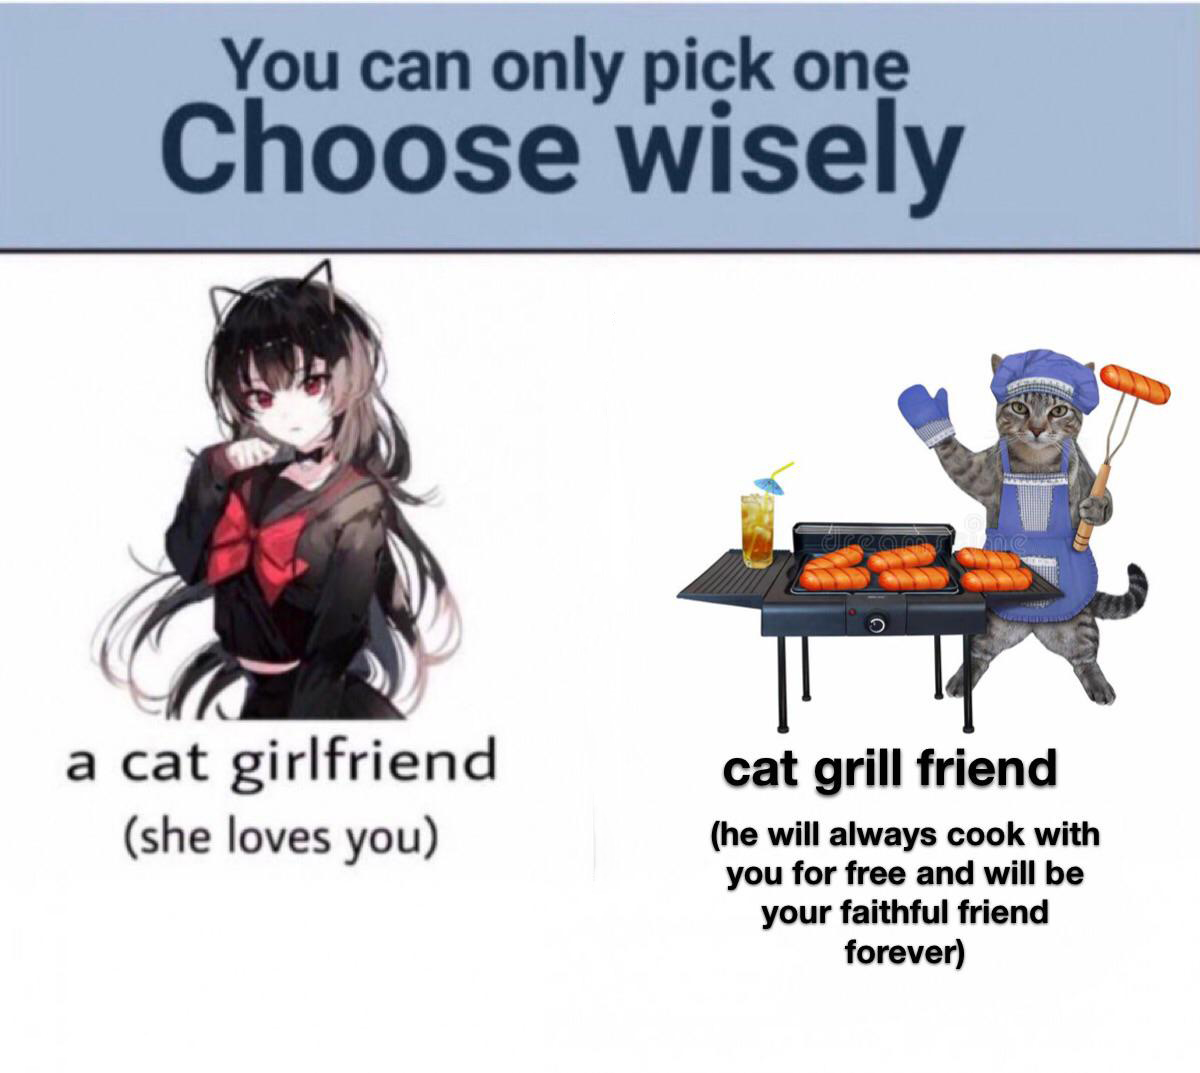 daily dose of pics - cartoon - You can only pick one Choose wisely a cat girlfriend she loves you O cat grill friend he will always cook with you for free and will be your faithful friend forever